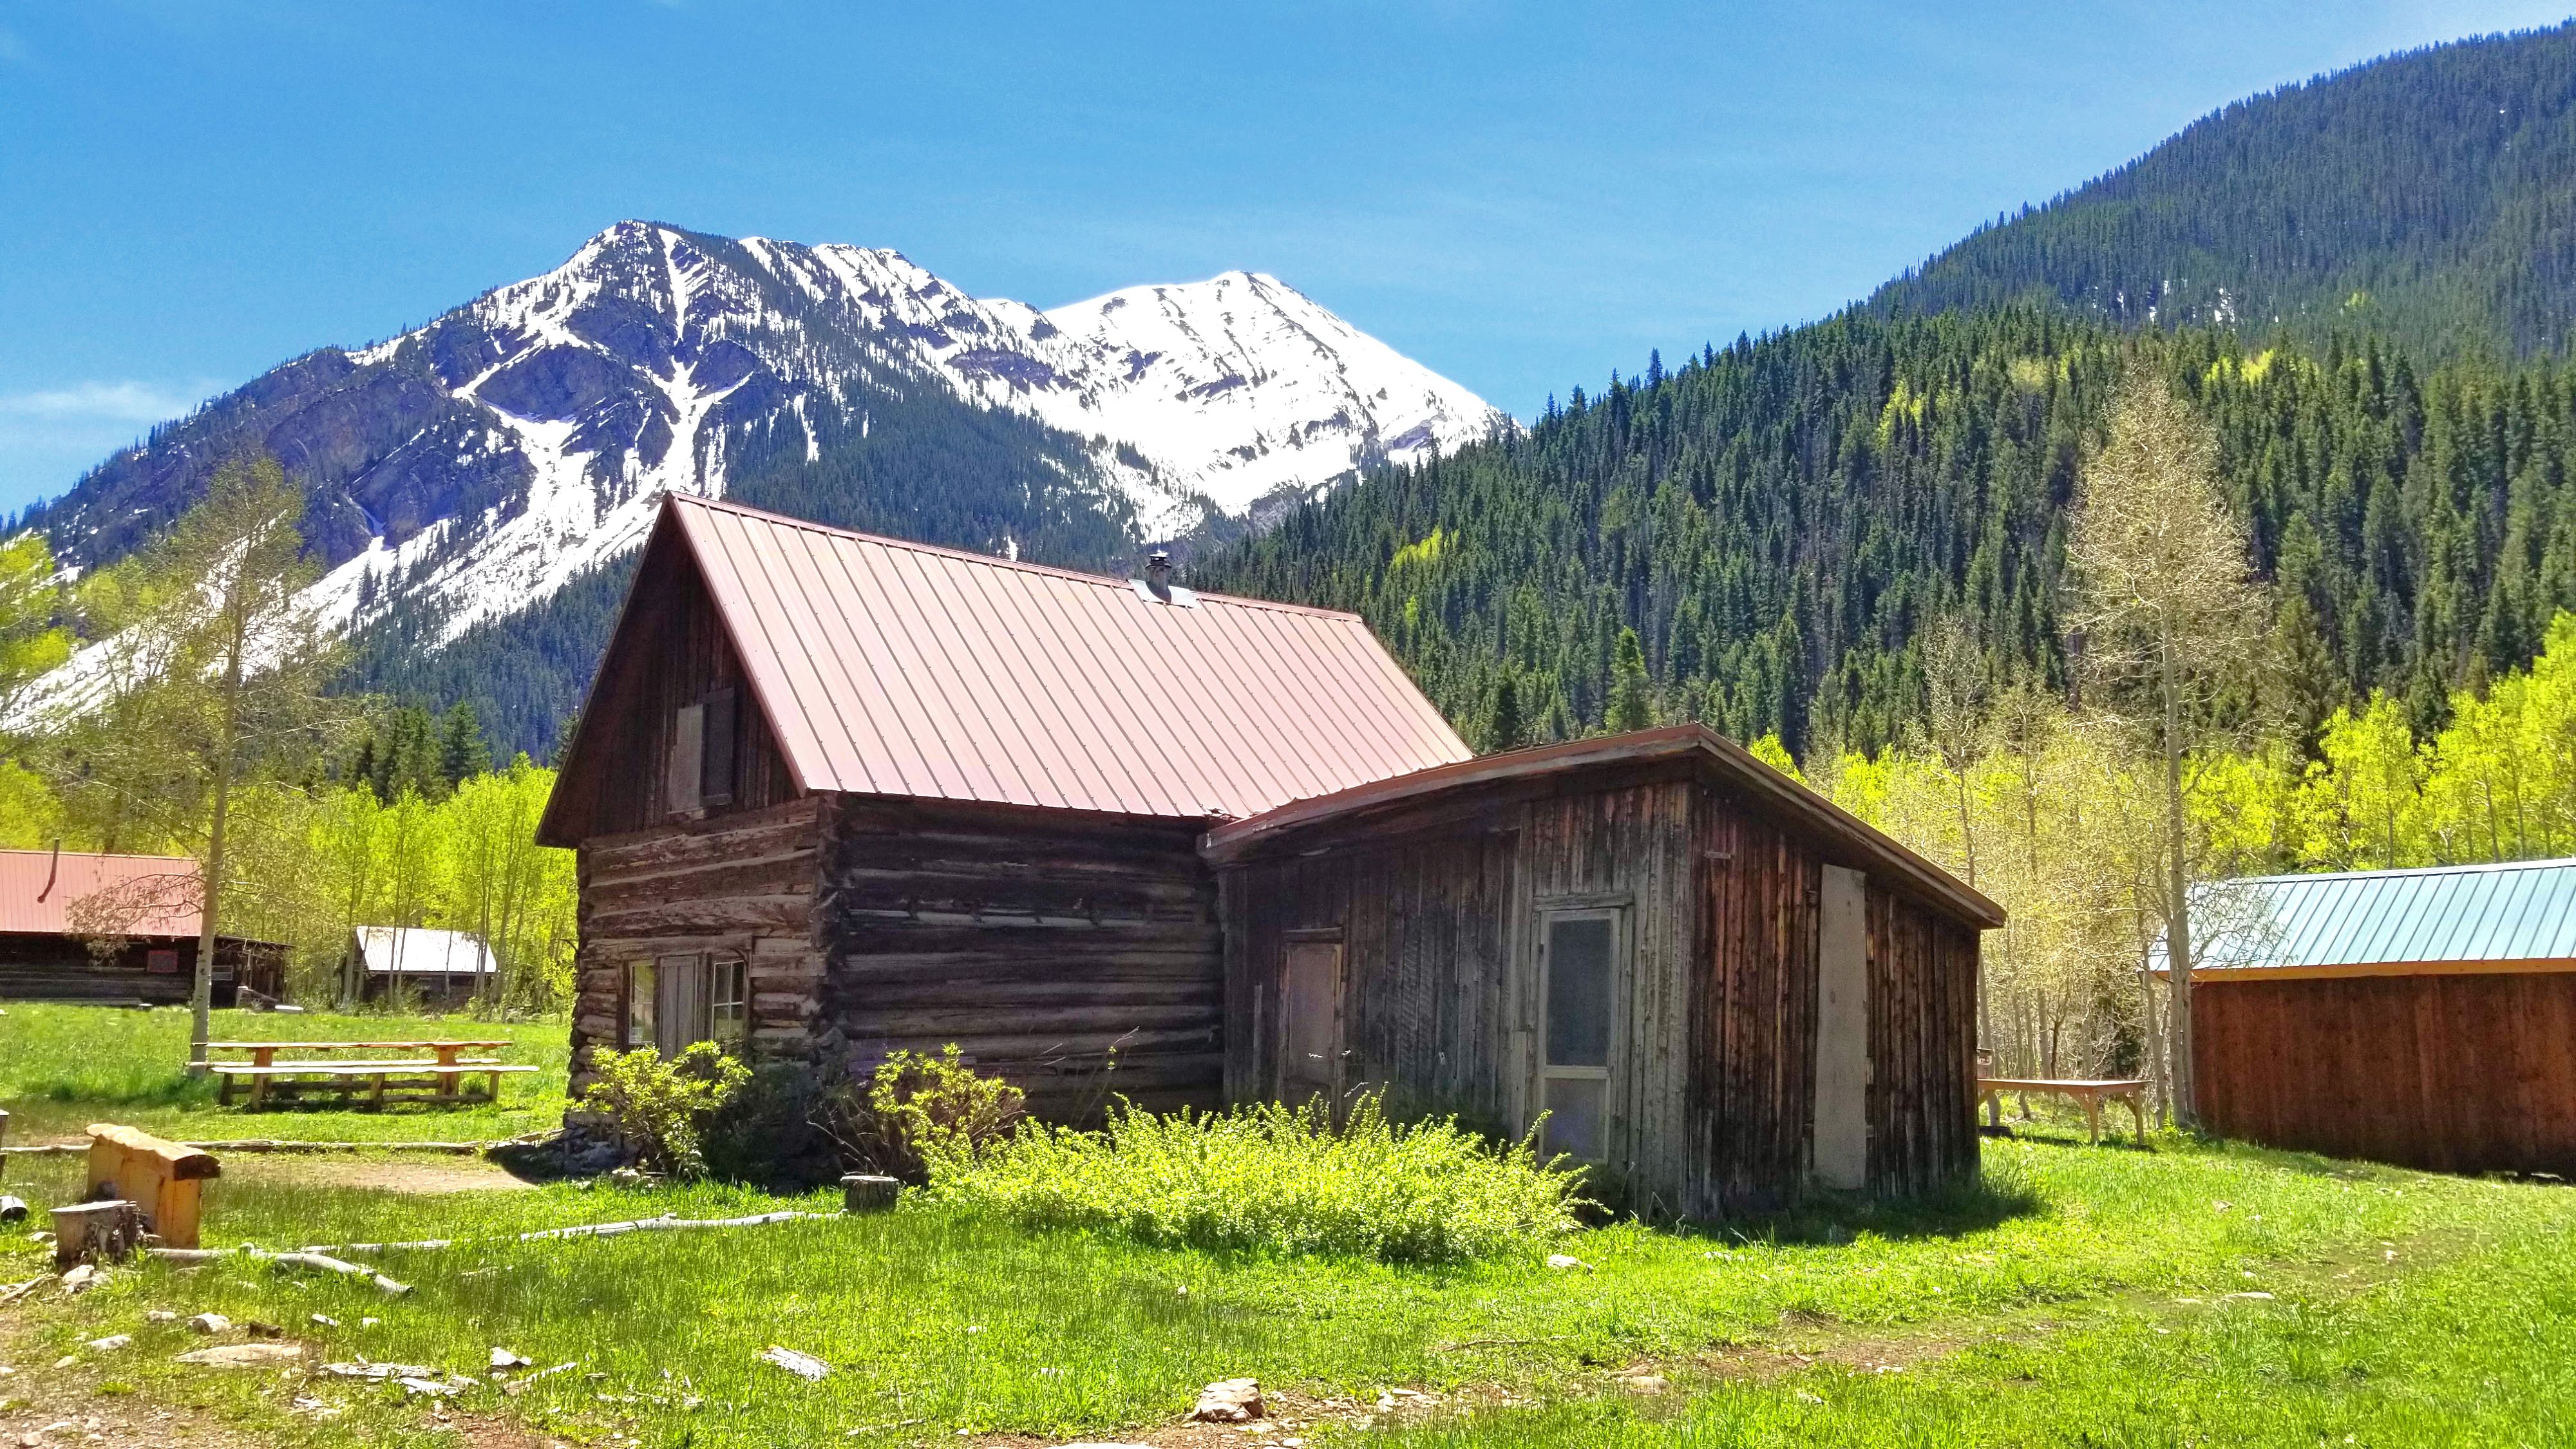 A log cabin in the mountains, one of the secrets of crystal mill